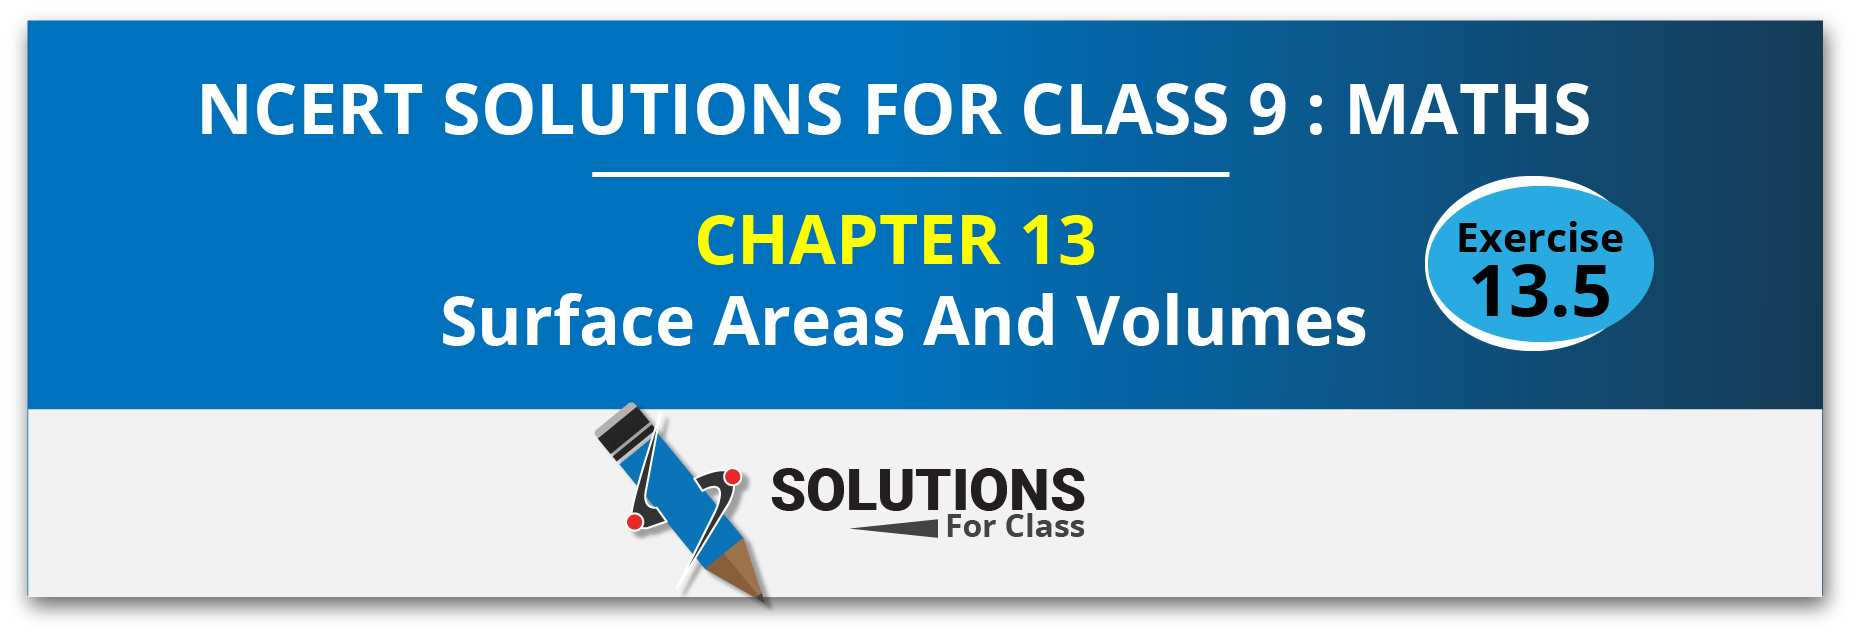 NCERT Solutions for Class 9 Maths Chapter 13 Surface Areas and Volumes Ex 13.5